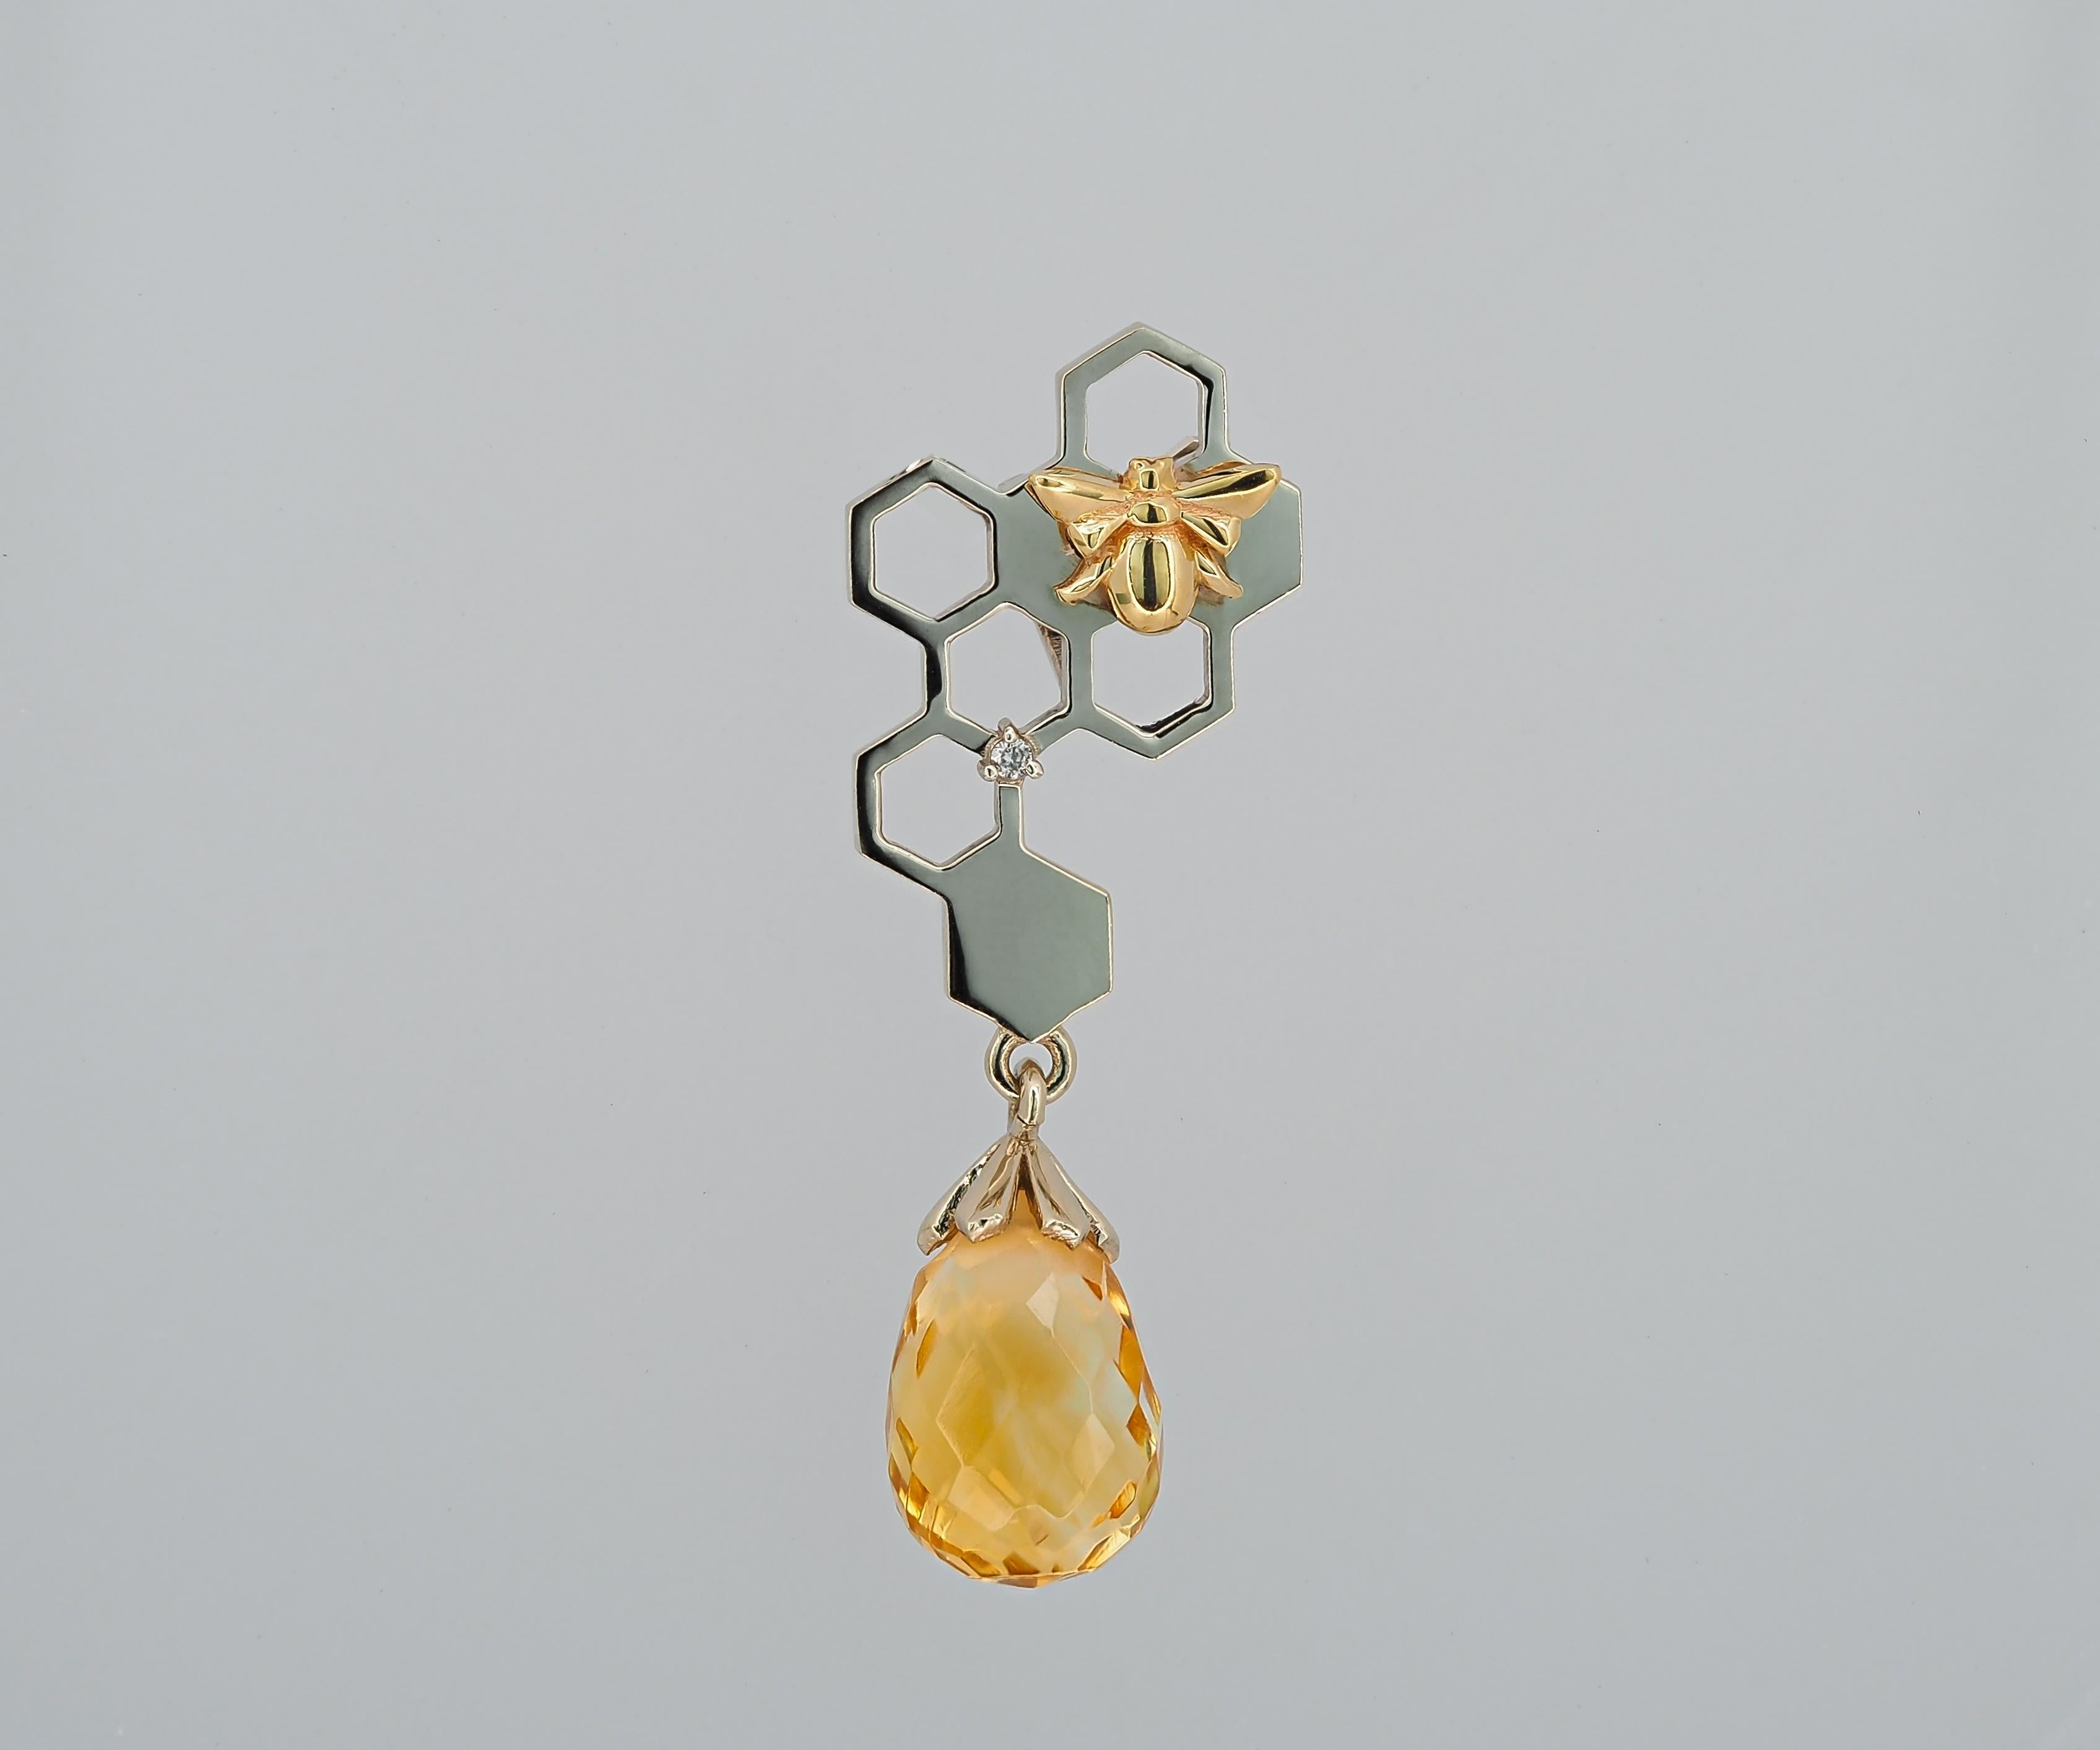 Gold bee pendant. Honecomb pendant. 
14k gold citrine pendant. Citrine briolette pendant. Honey bee pendant Beehive and Bee Pendant.Gold white and yellow (bee) 14k marked.

Metal: 14k gold
Weight: 1.64 g.
Pendant size - 33x11.3 mm.

Citrines 1 piece